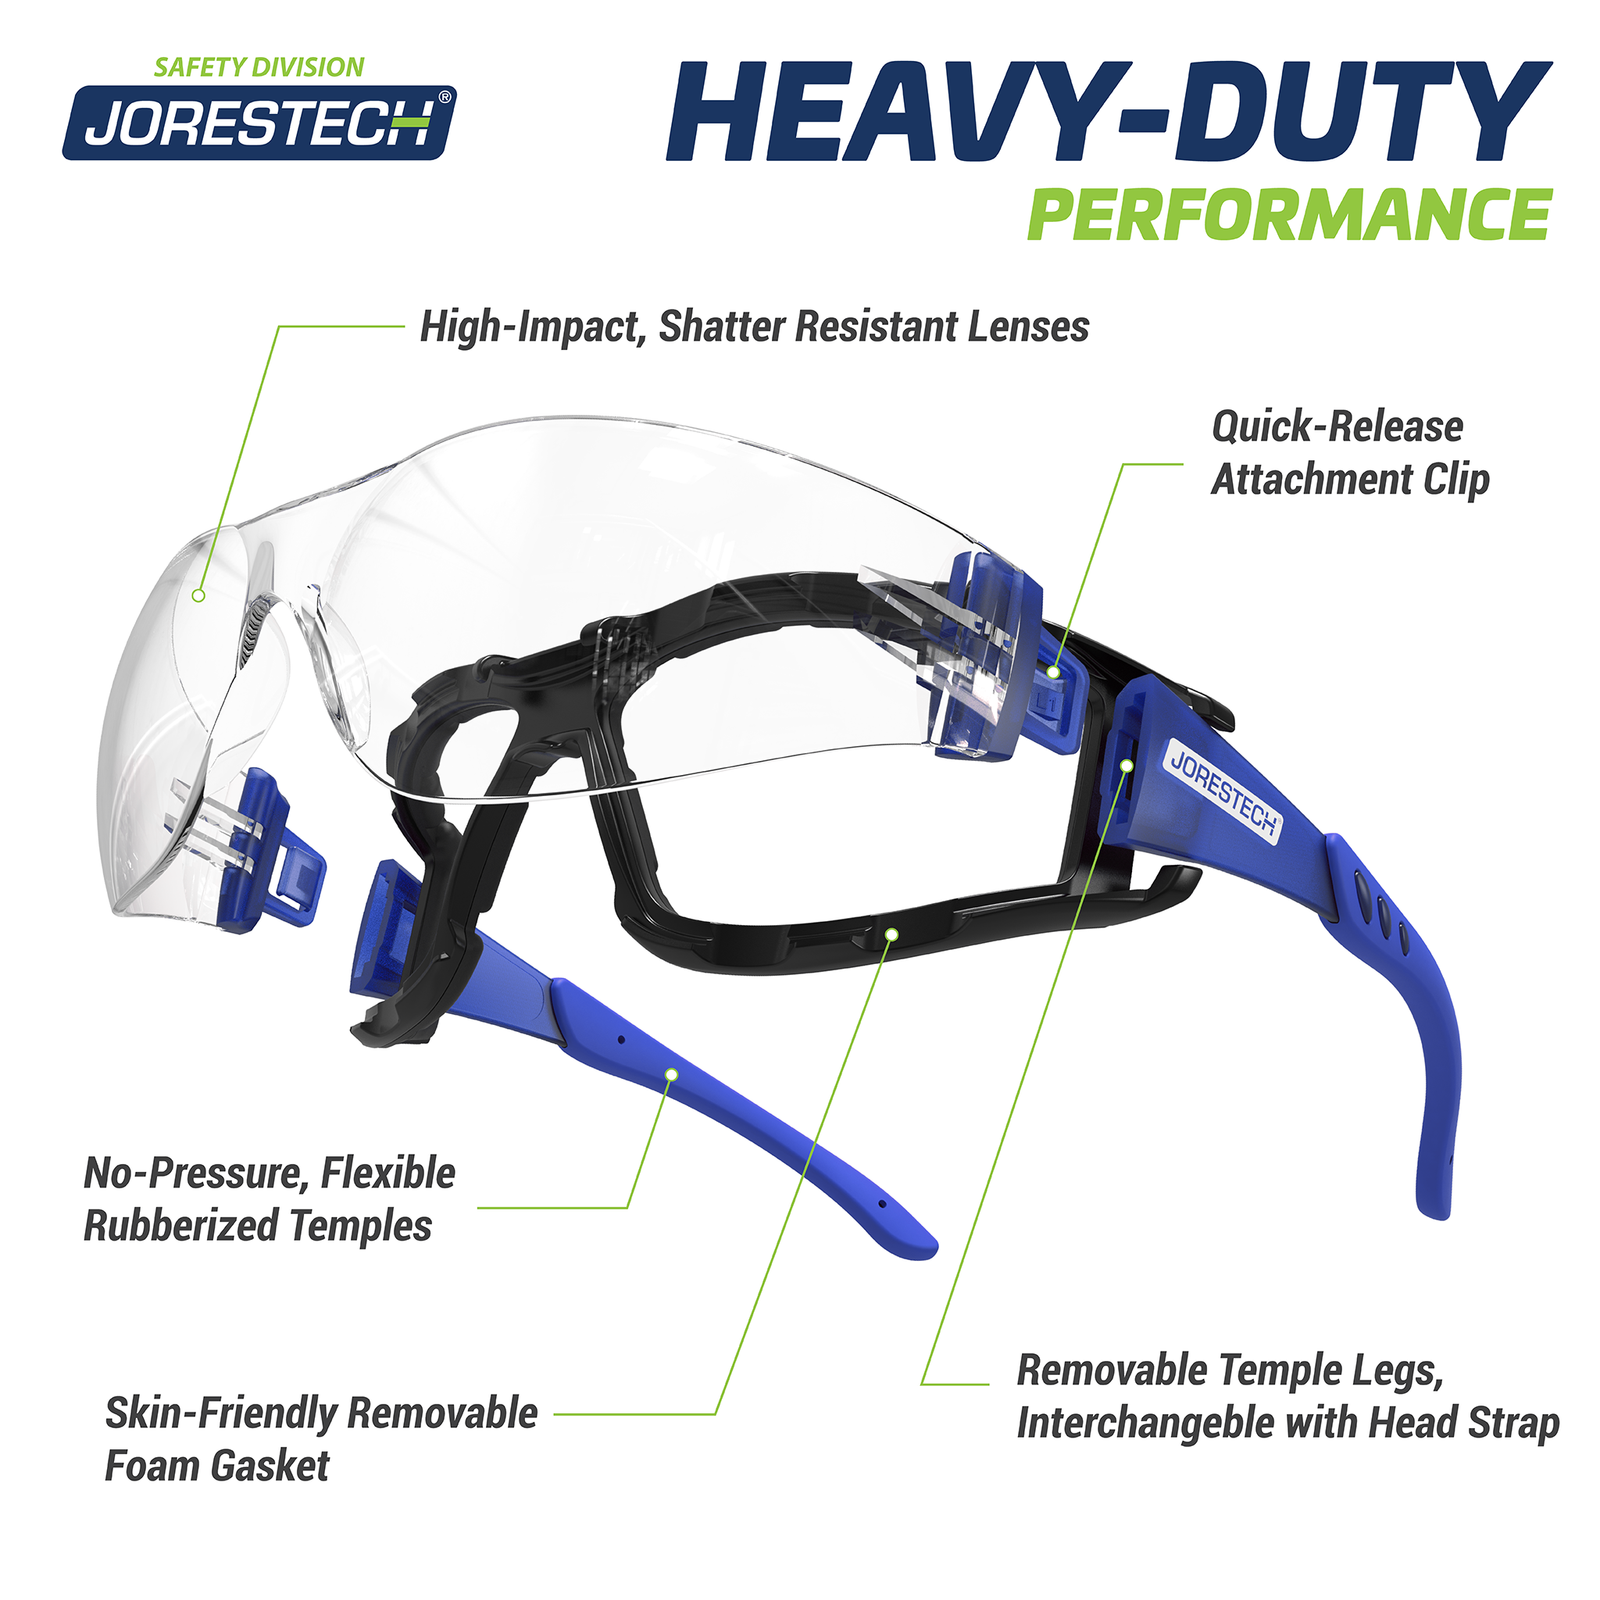 Features  the JORESTECH Blue and clear anti fog high impact safety glasses with removable foam seal gasket and temples. Call out read: High impact shattering resistant lenses, no pressure, flexible rubberized temples, skin friendly removable foam gasket, quick release attachment clip, removable Temple legs, interchangeable with head strap